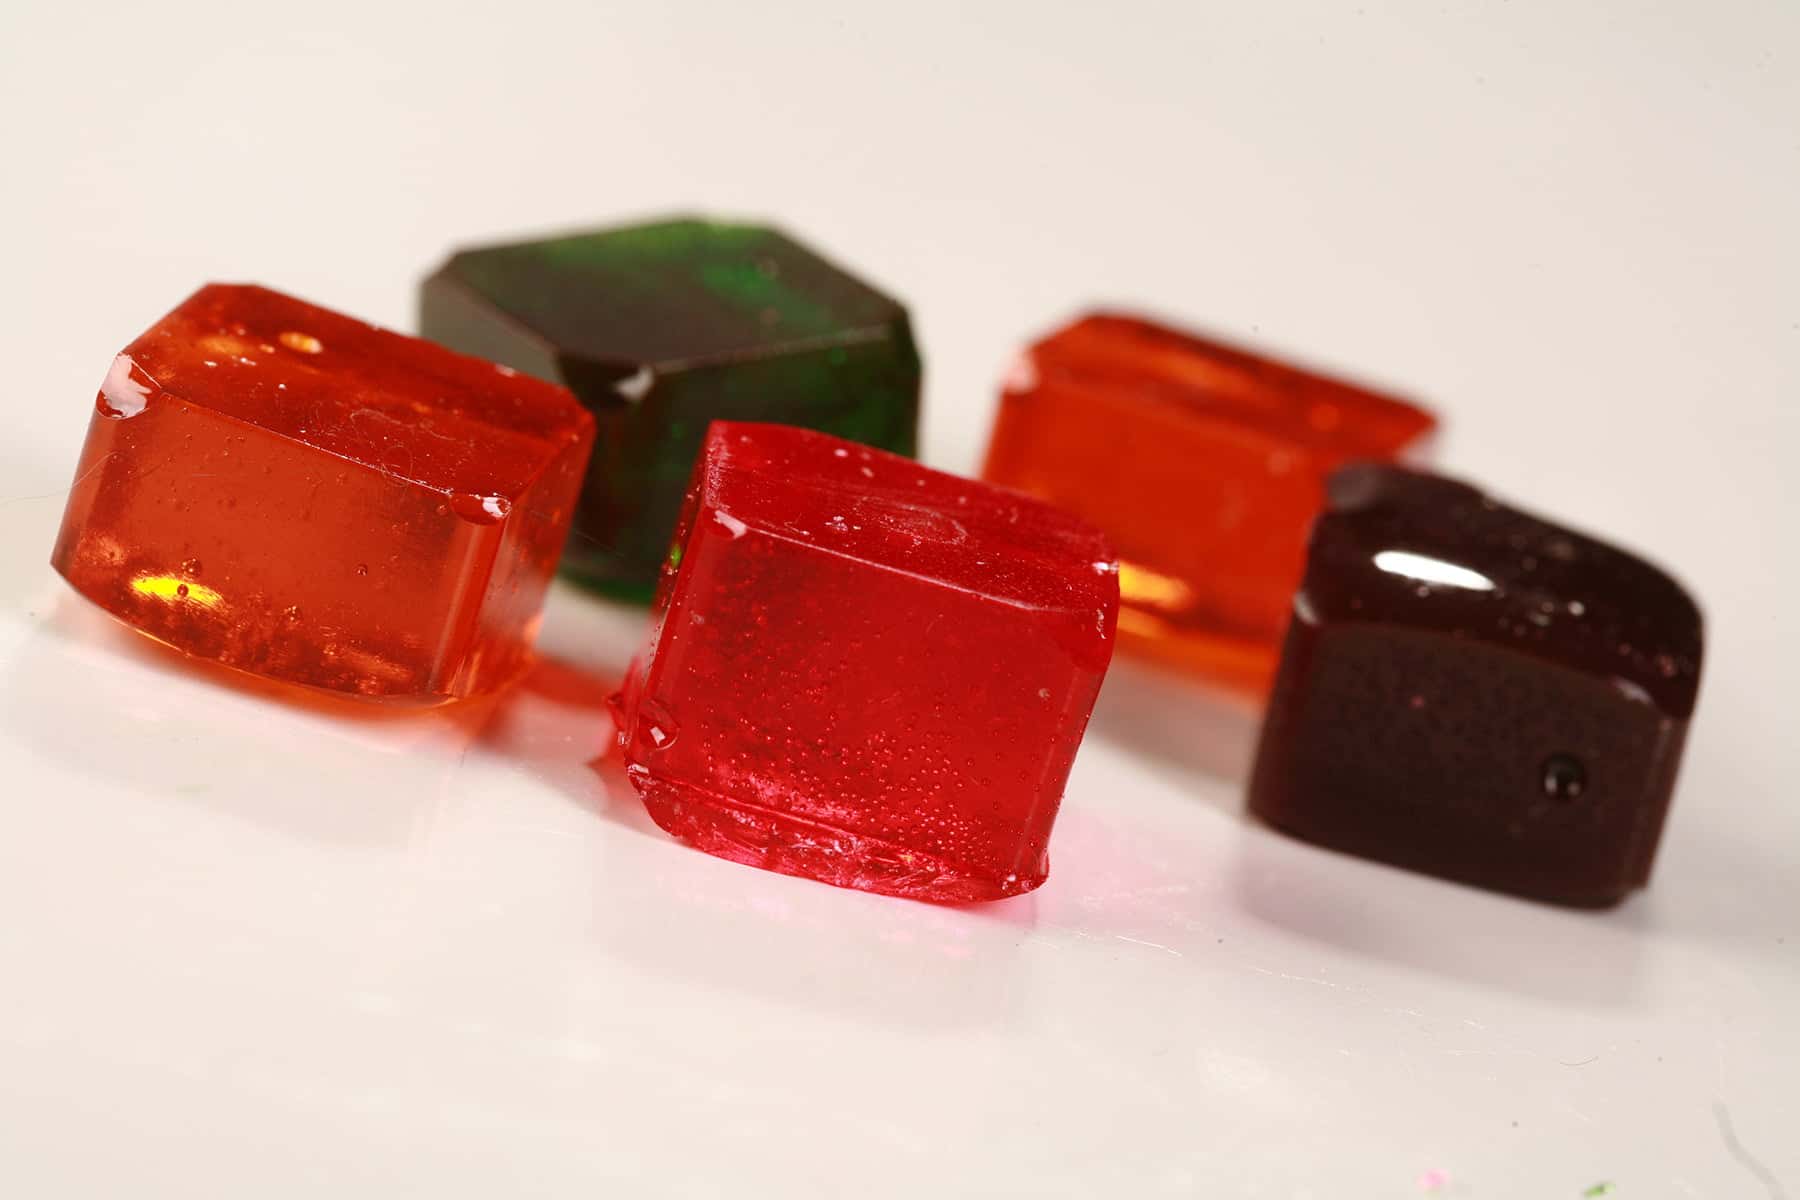 5 squares of colourful hard candy are shown on a white background.